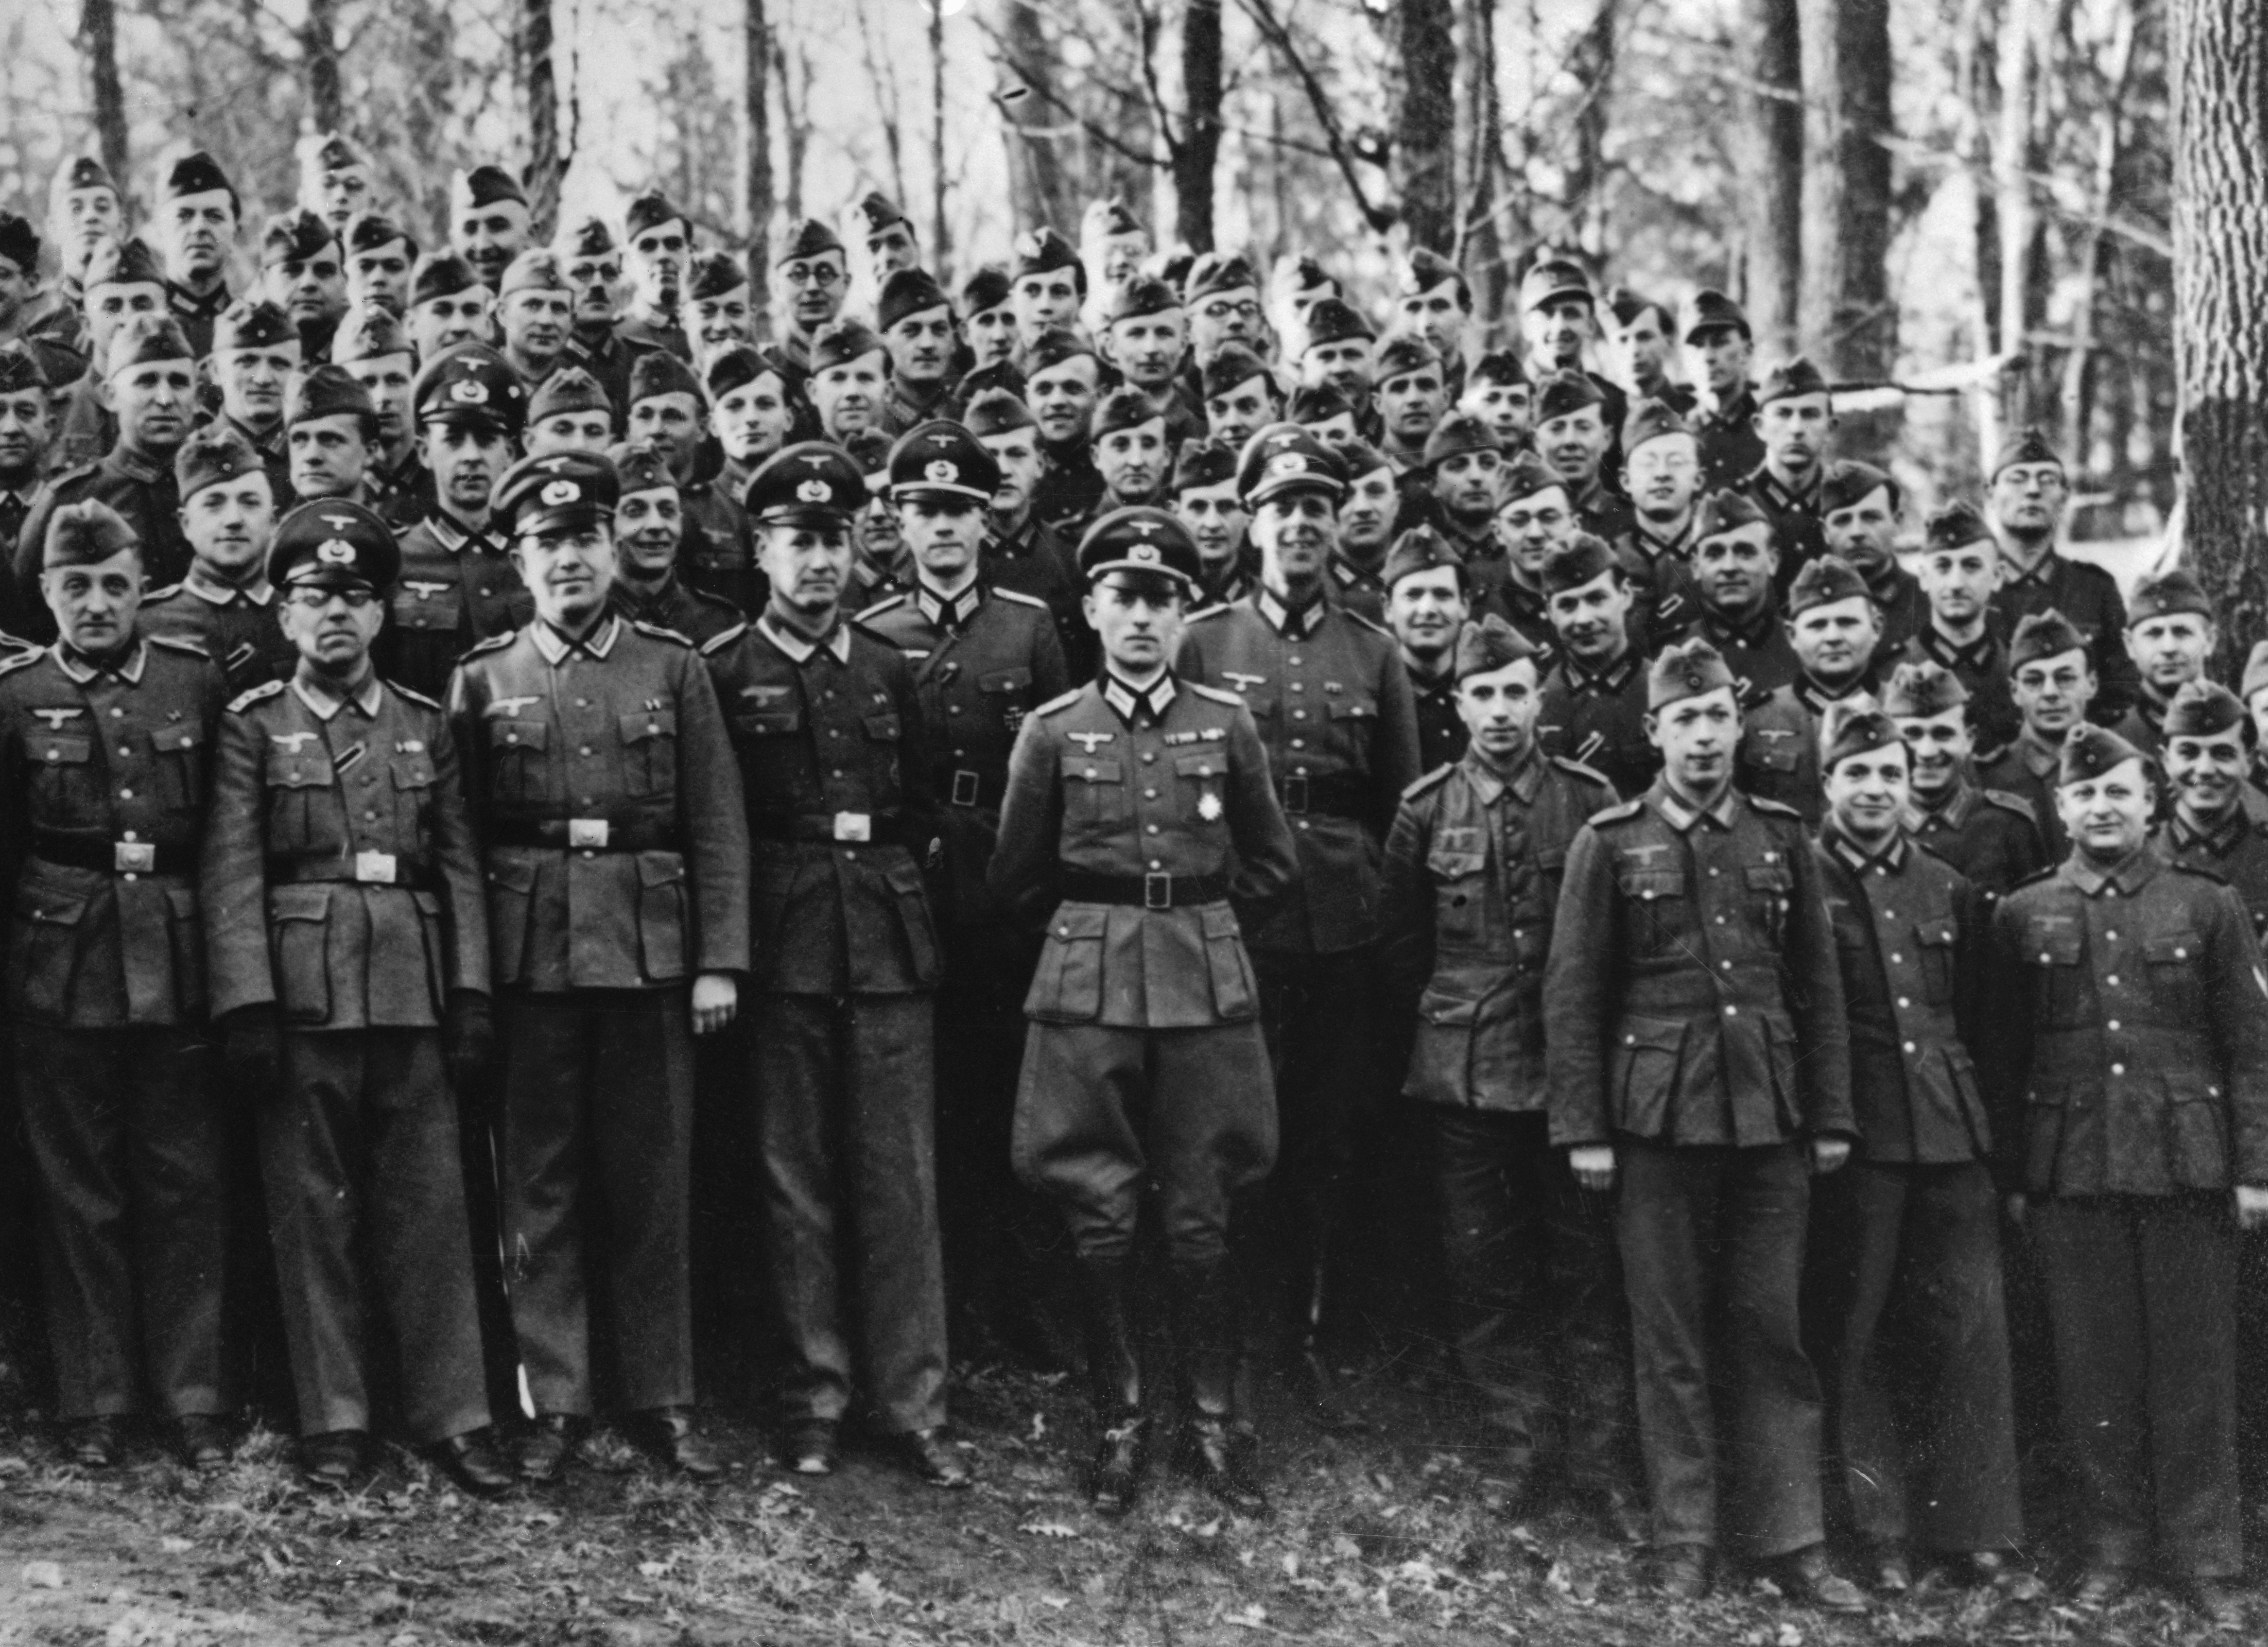 Reinhard Gehlen (center) and staff of the Wermacht’s Counter Intelligence Unit. (Getty Images)